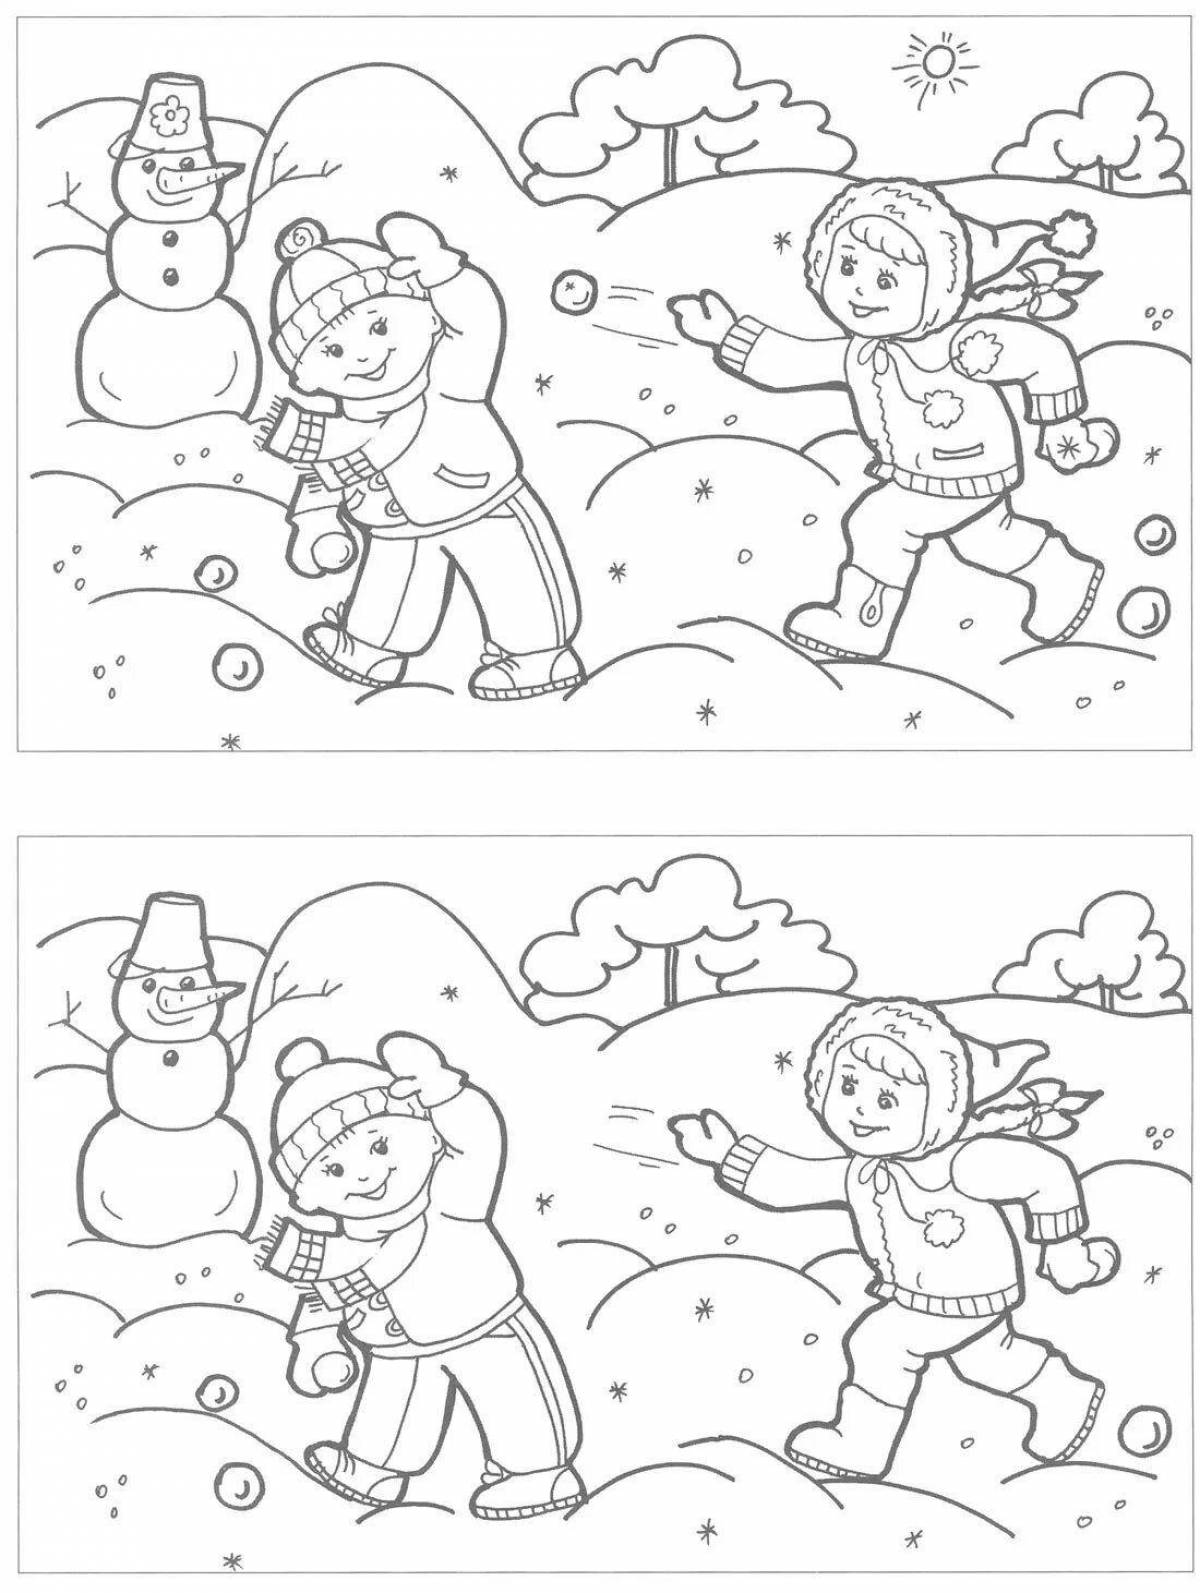 Rampant snowball fight coloring page